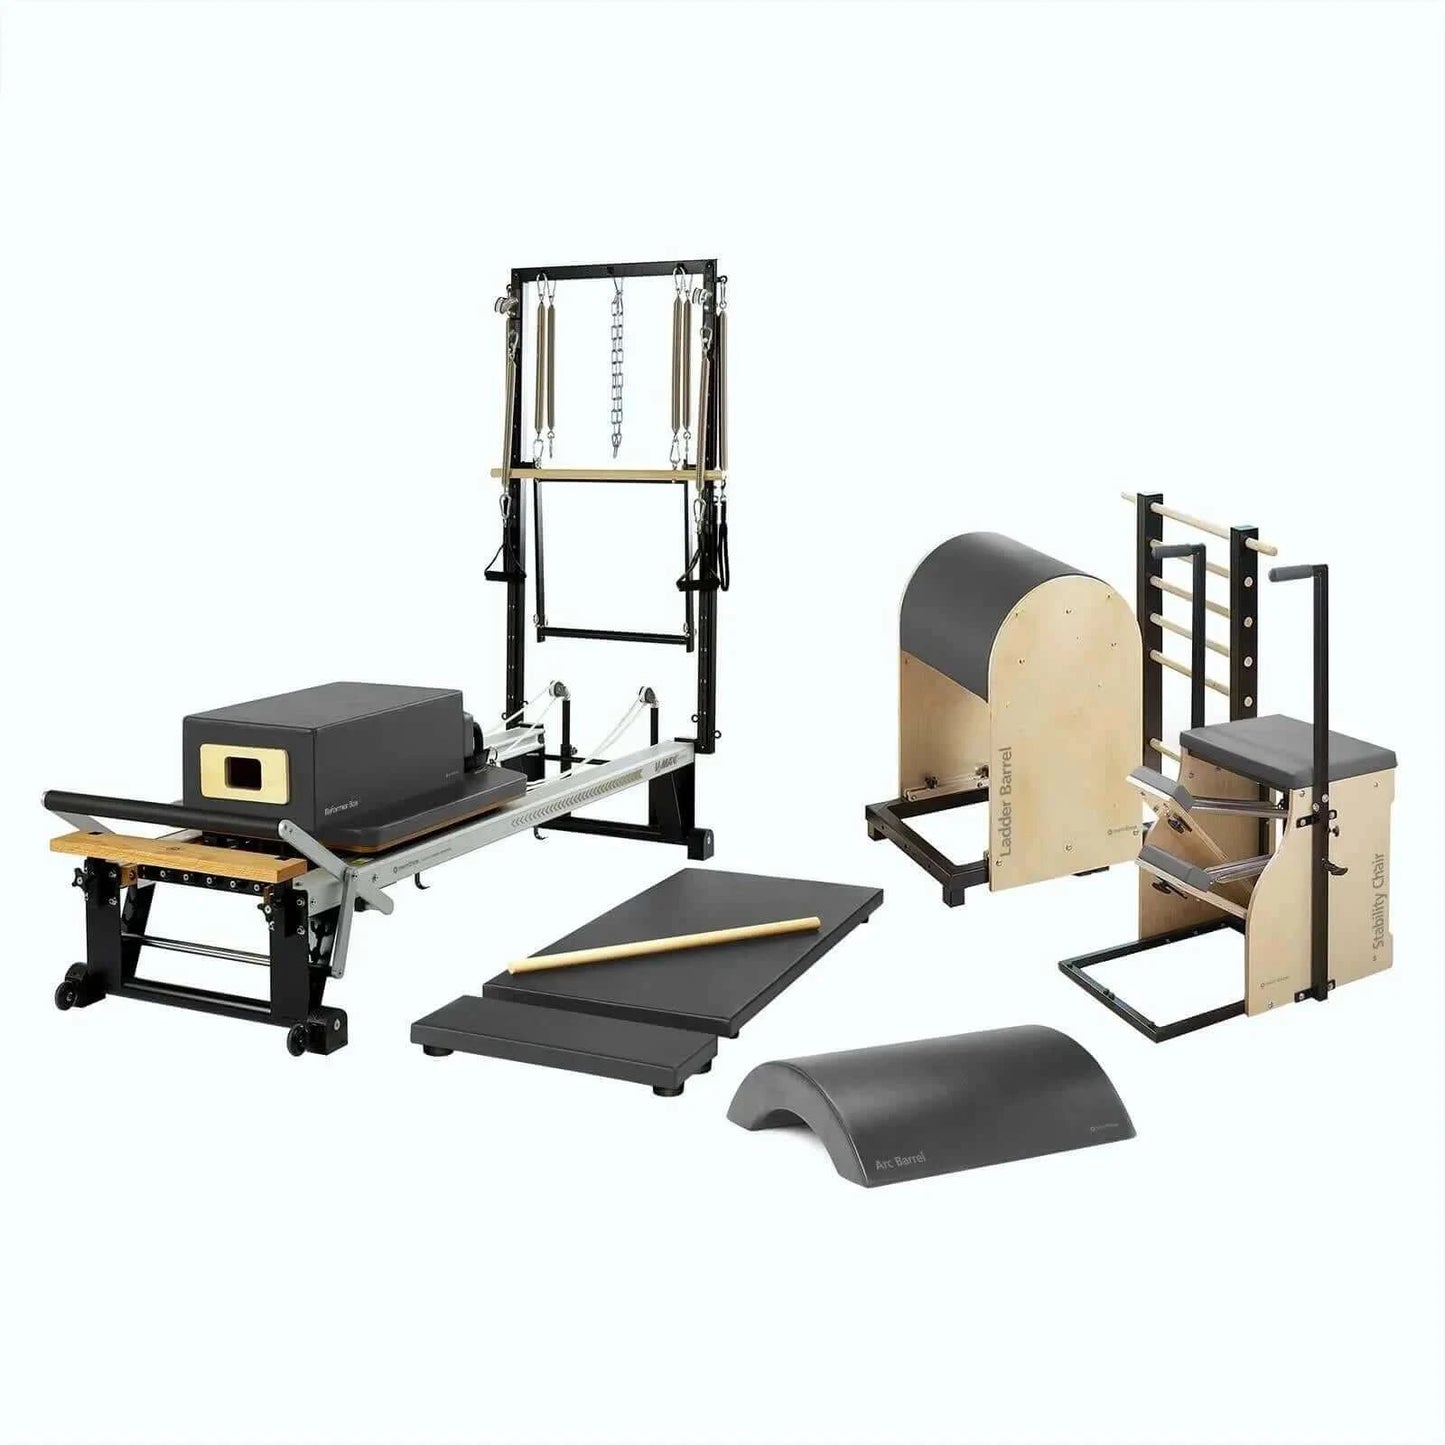 Gunmetal Gray Merrithew™ Pilates One-On-One Studio Bundle by Merrithew™ sold by Pilates Matters® by BSP LLC